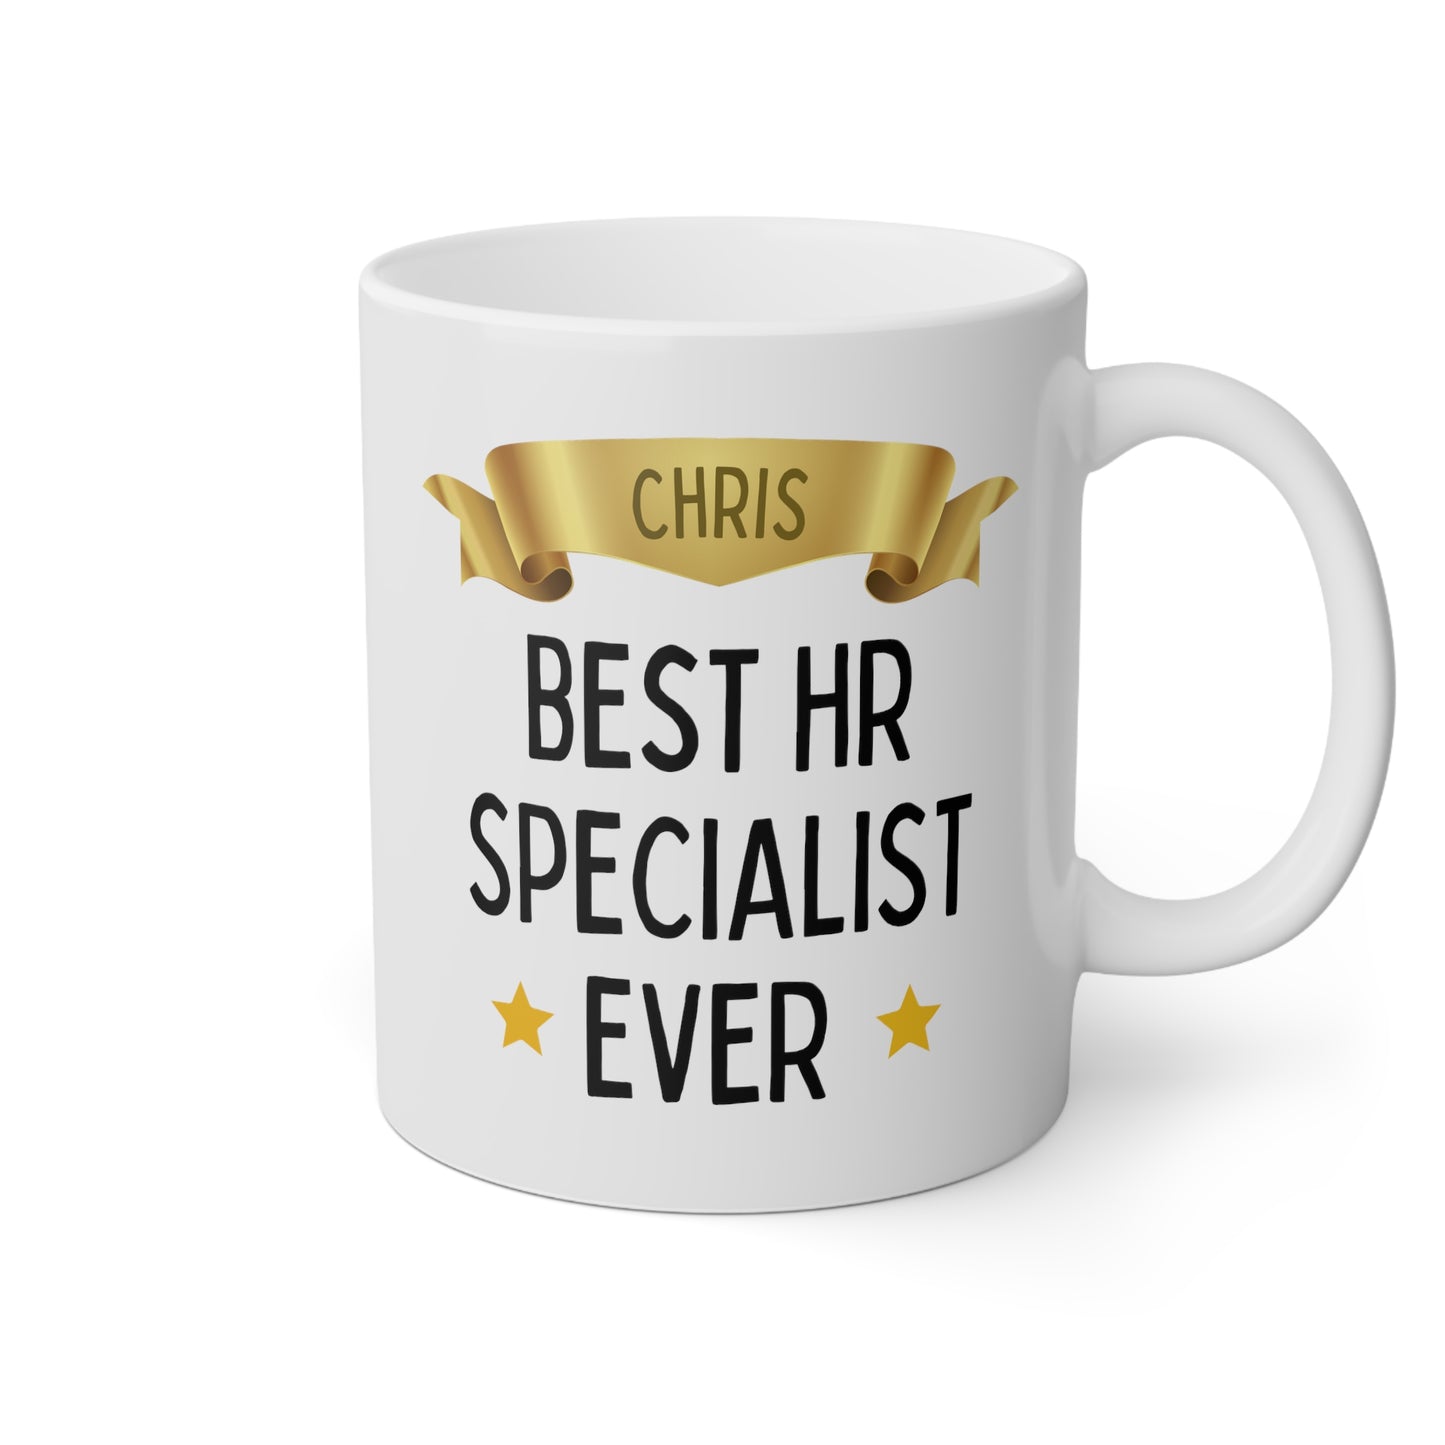 Best HR Specialist Ever 11oz white funny large coffee mug gift for human resources manager officer custom name personalize waveywares wavey wares wavywares wavy wares